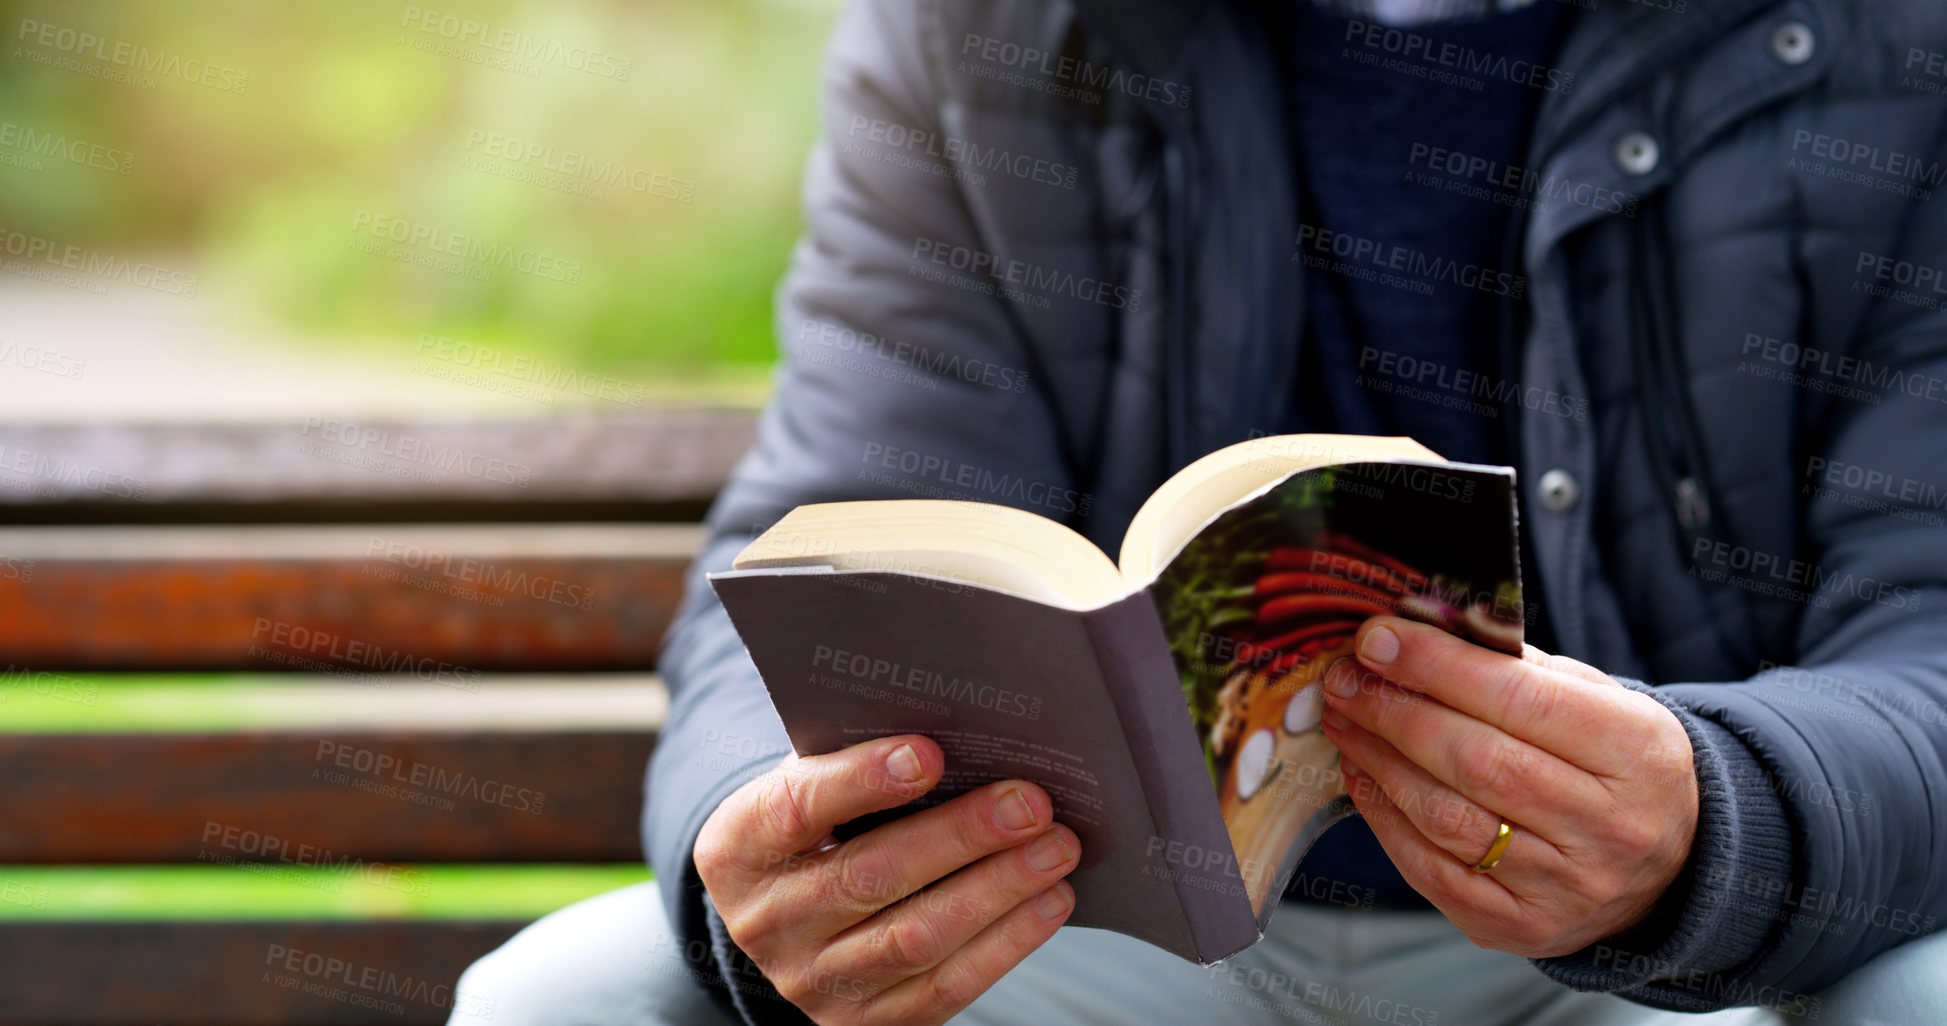 Buy stock photo Cropped shot of an unrecognizable elderly man reading a book by herself outside in a park